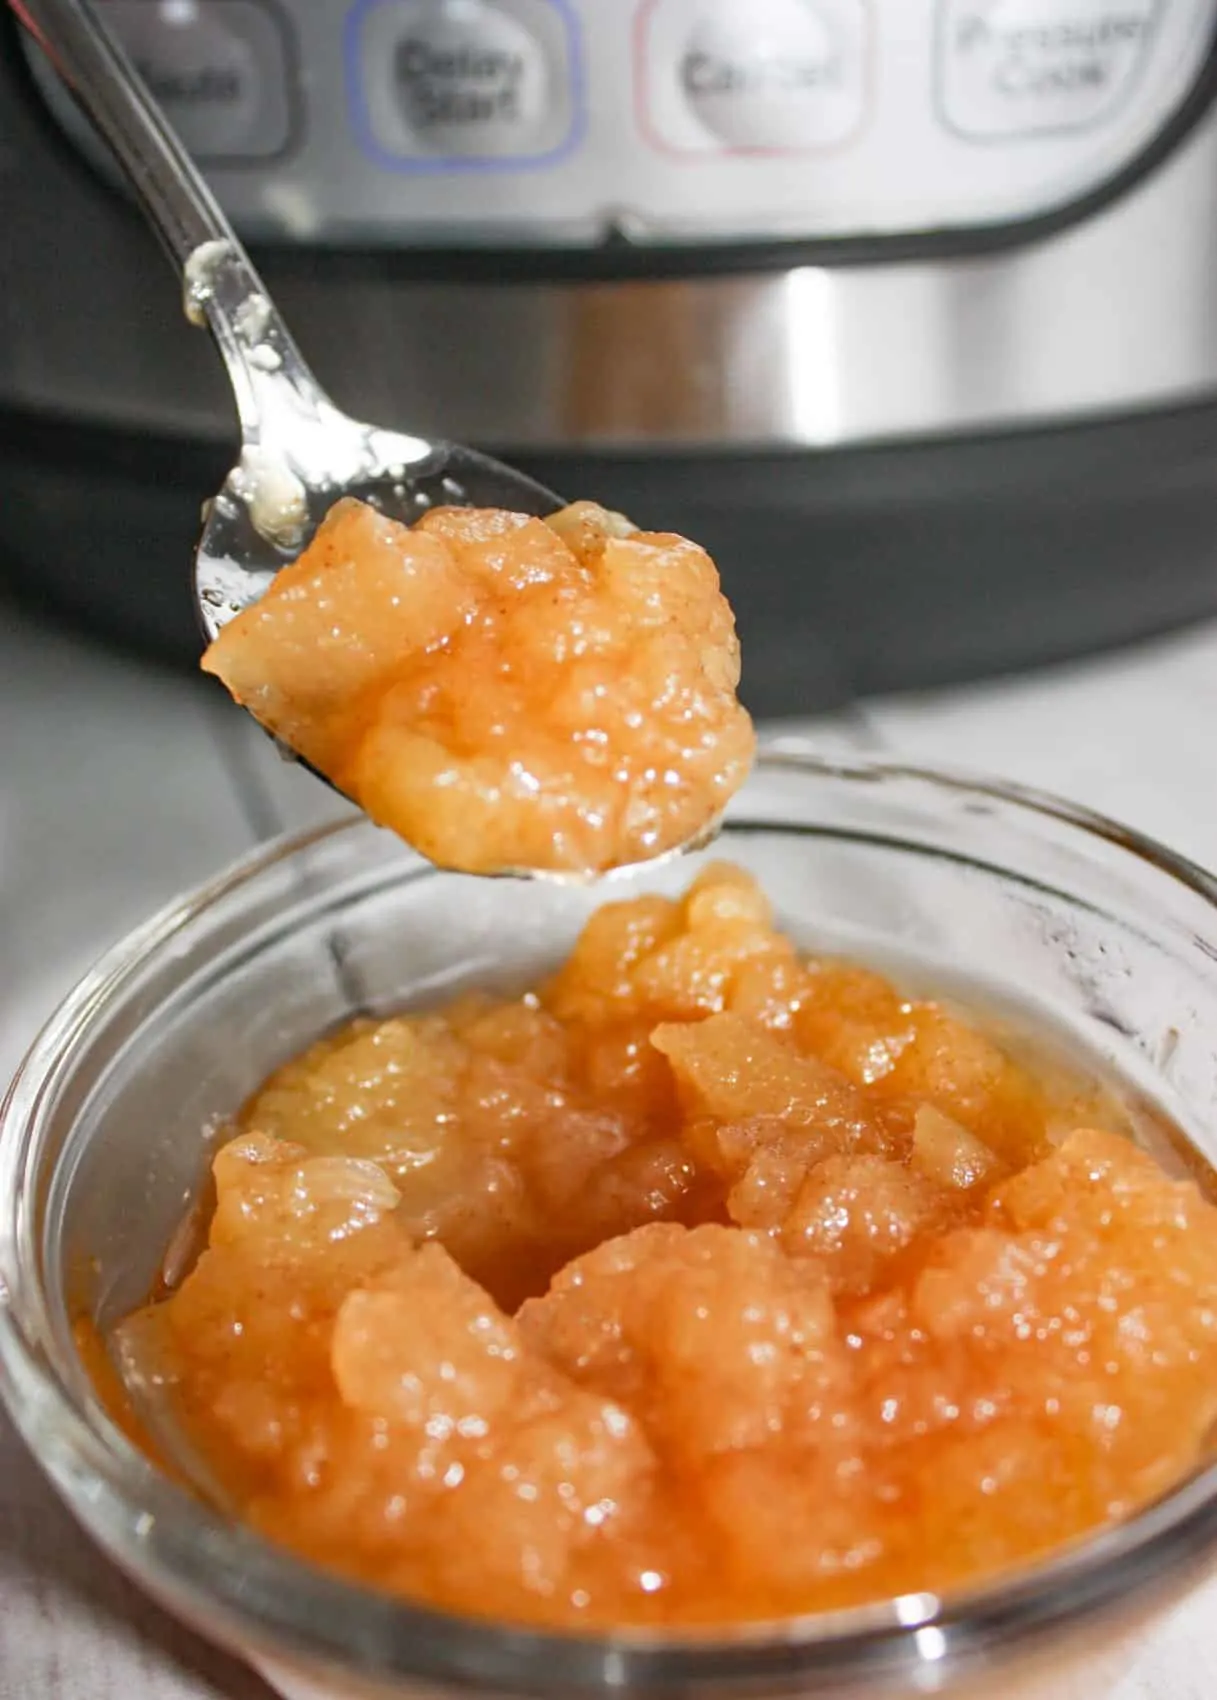 Instant Pot Chunky Apple Sauce is so quick and easy that you can enjoy fresh apple sauce at any time of the year.